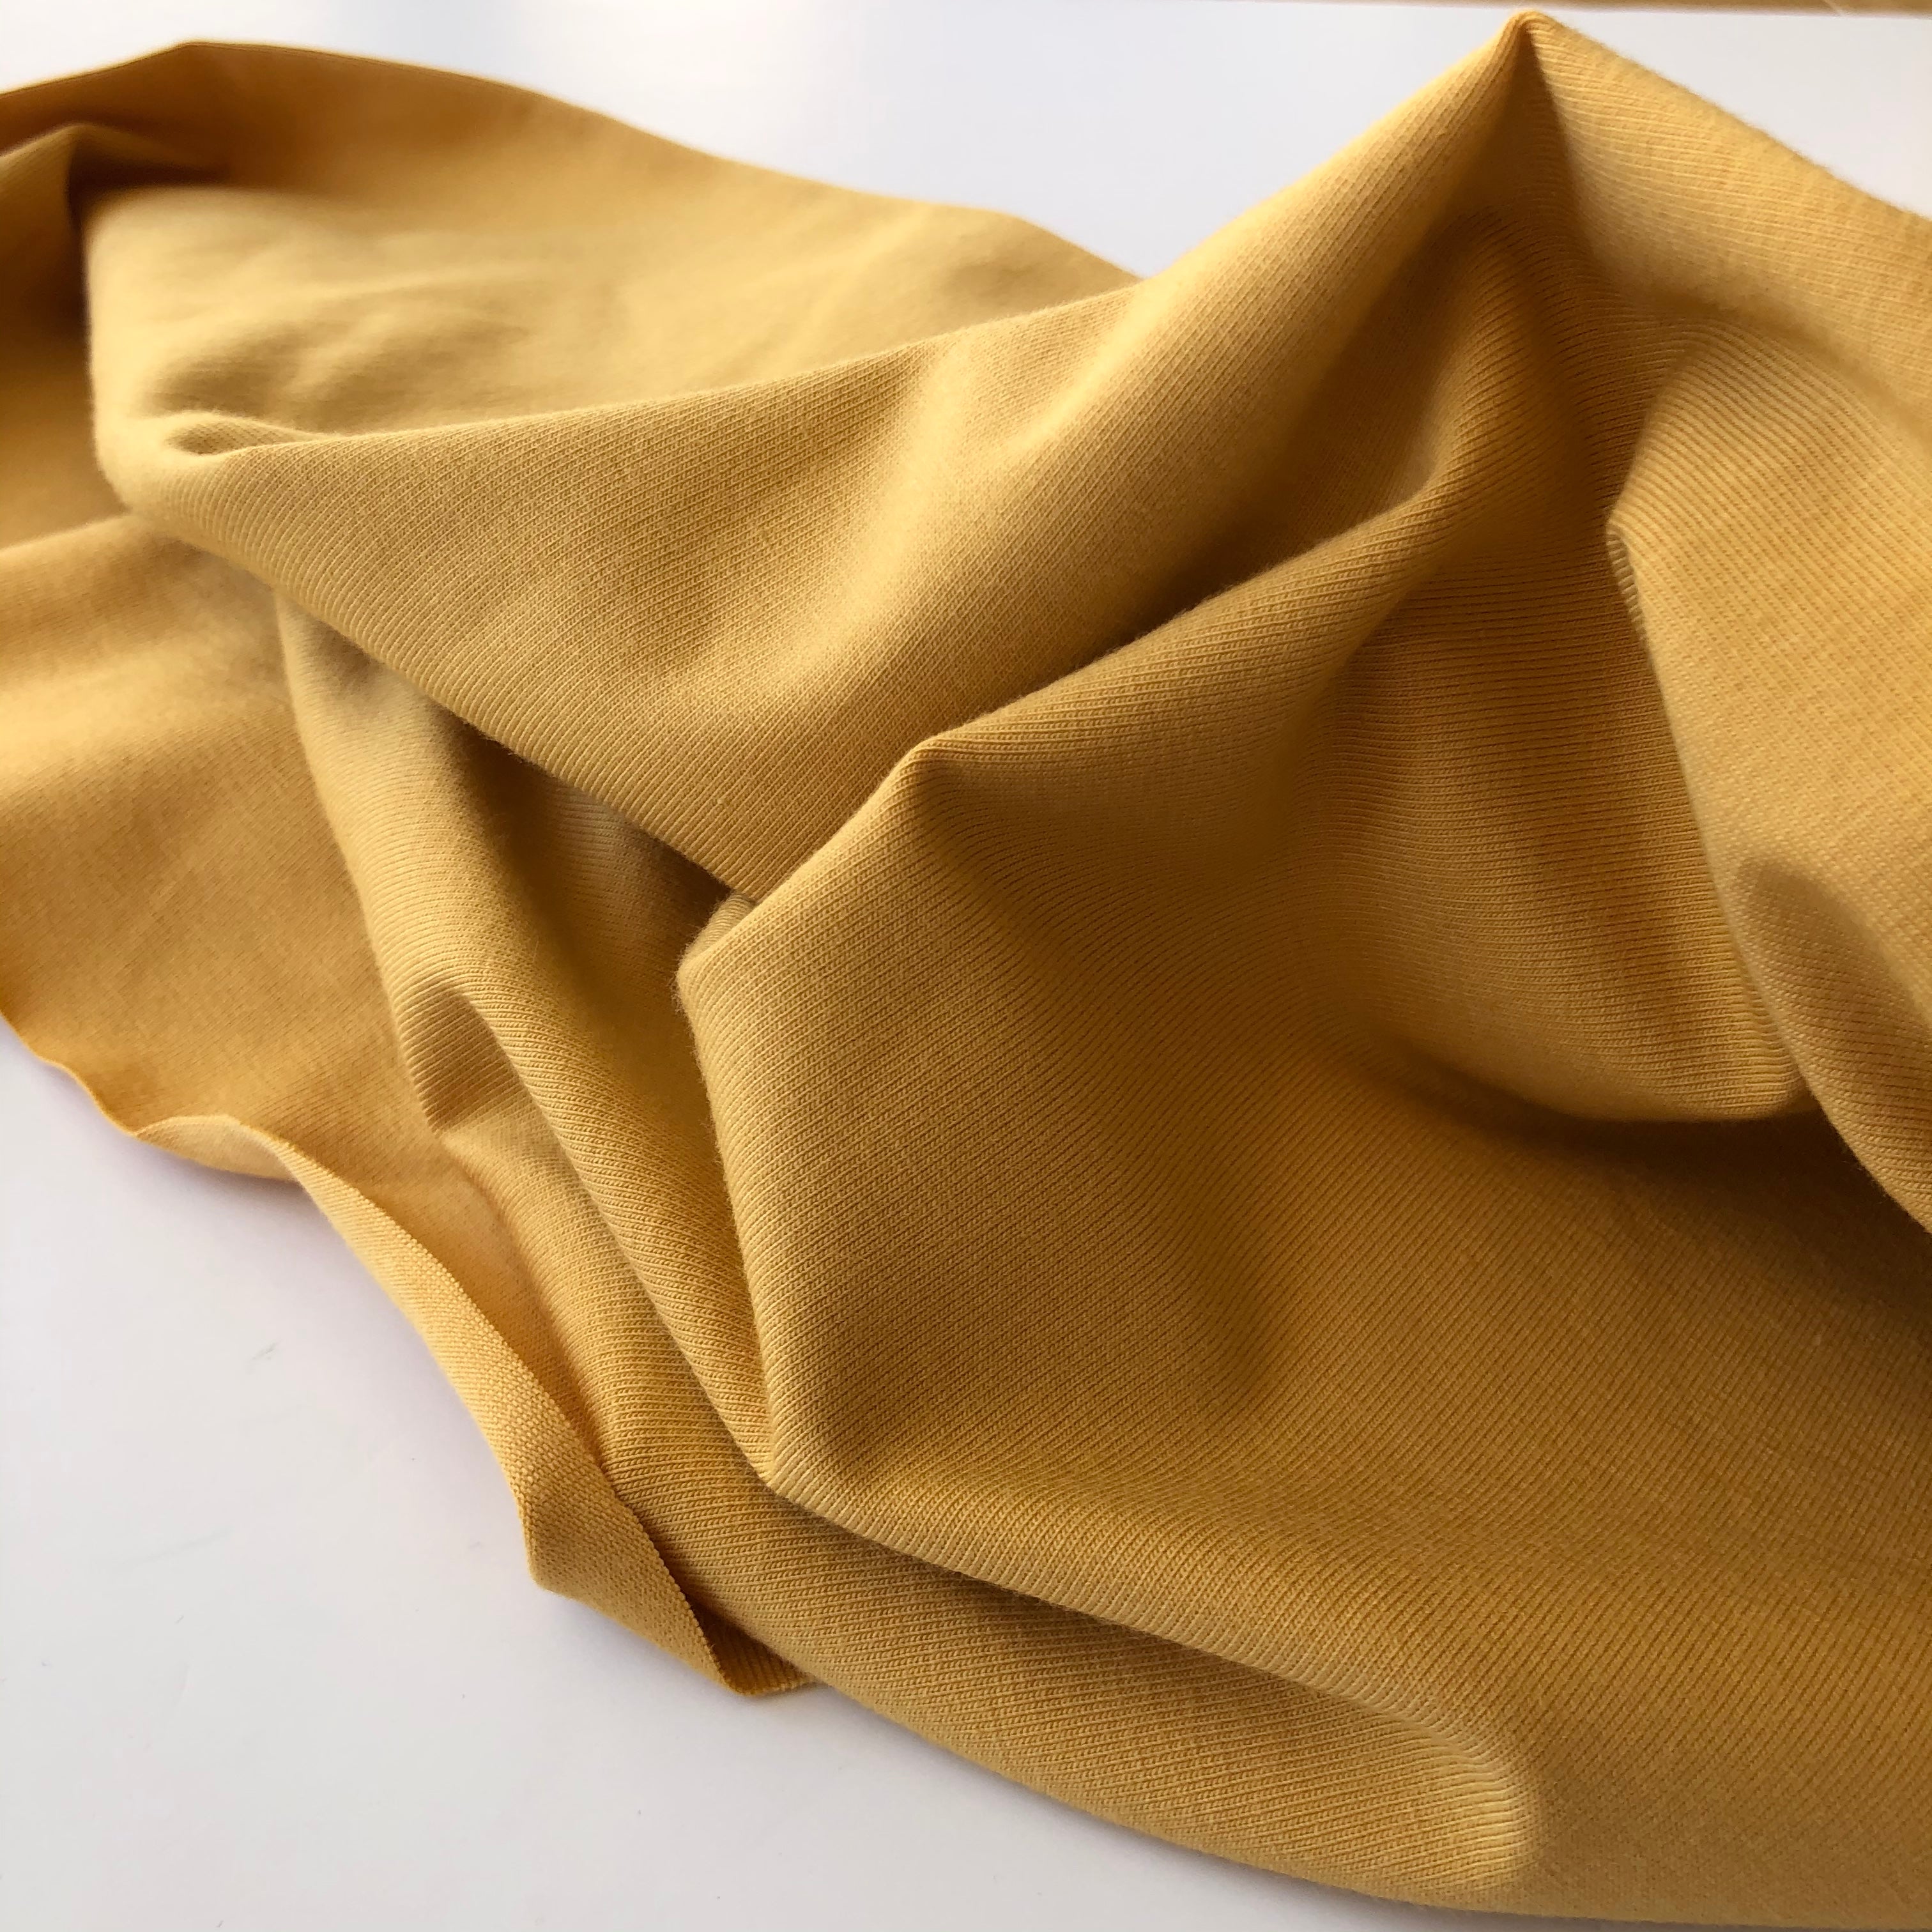 REMNANT 0.85 Metre - Essential Chic Amber Plain Cotton Jersey Fabric